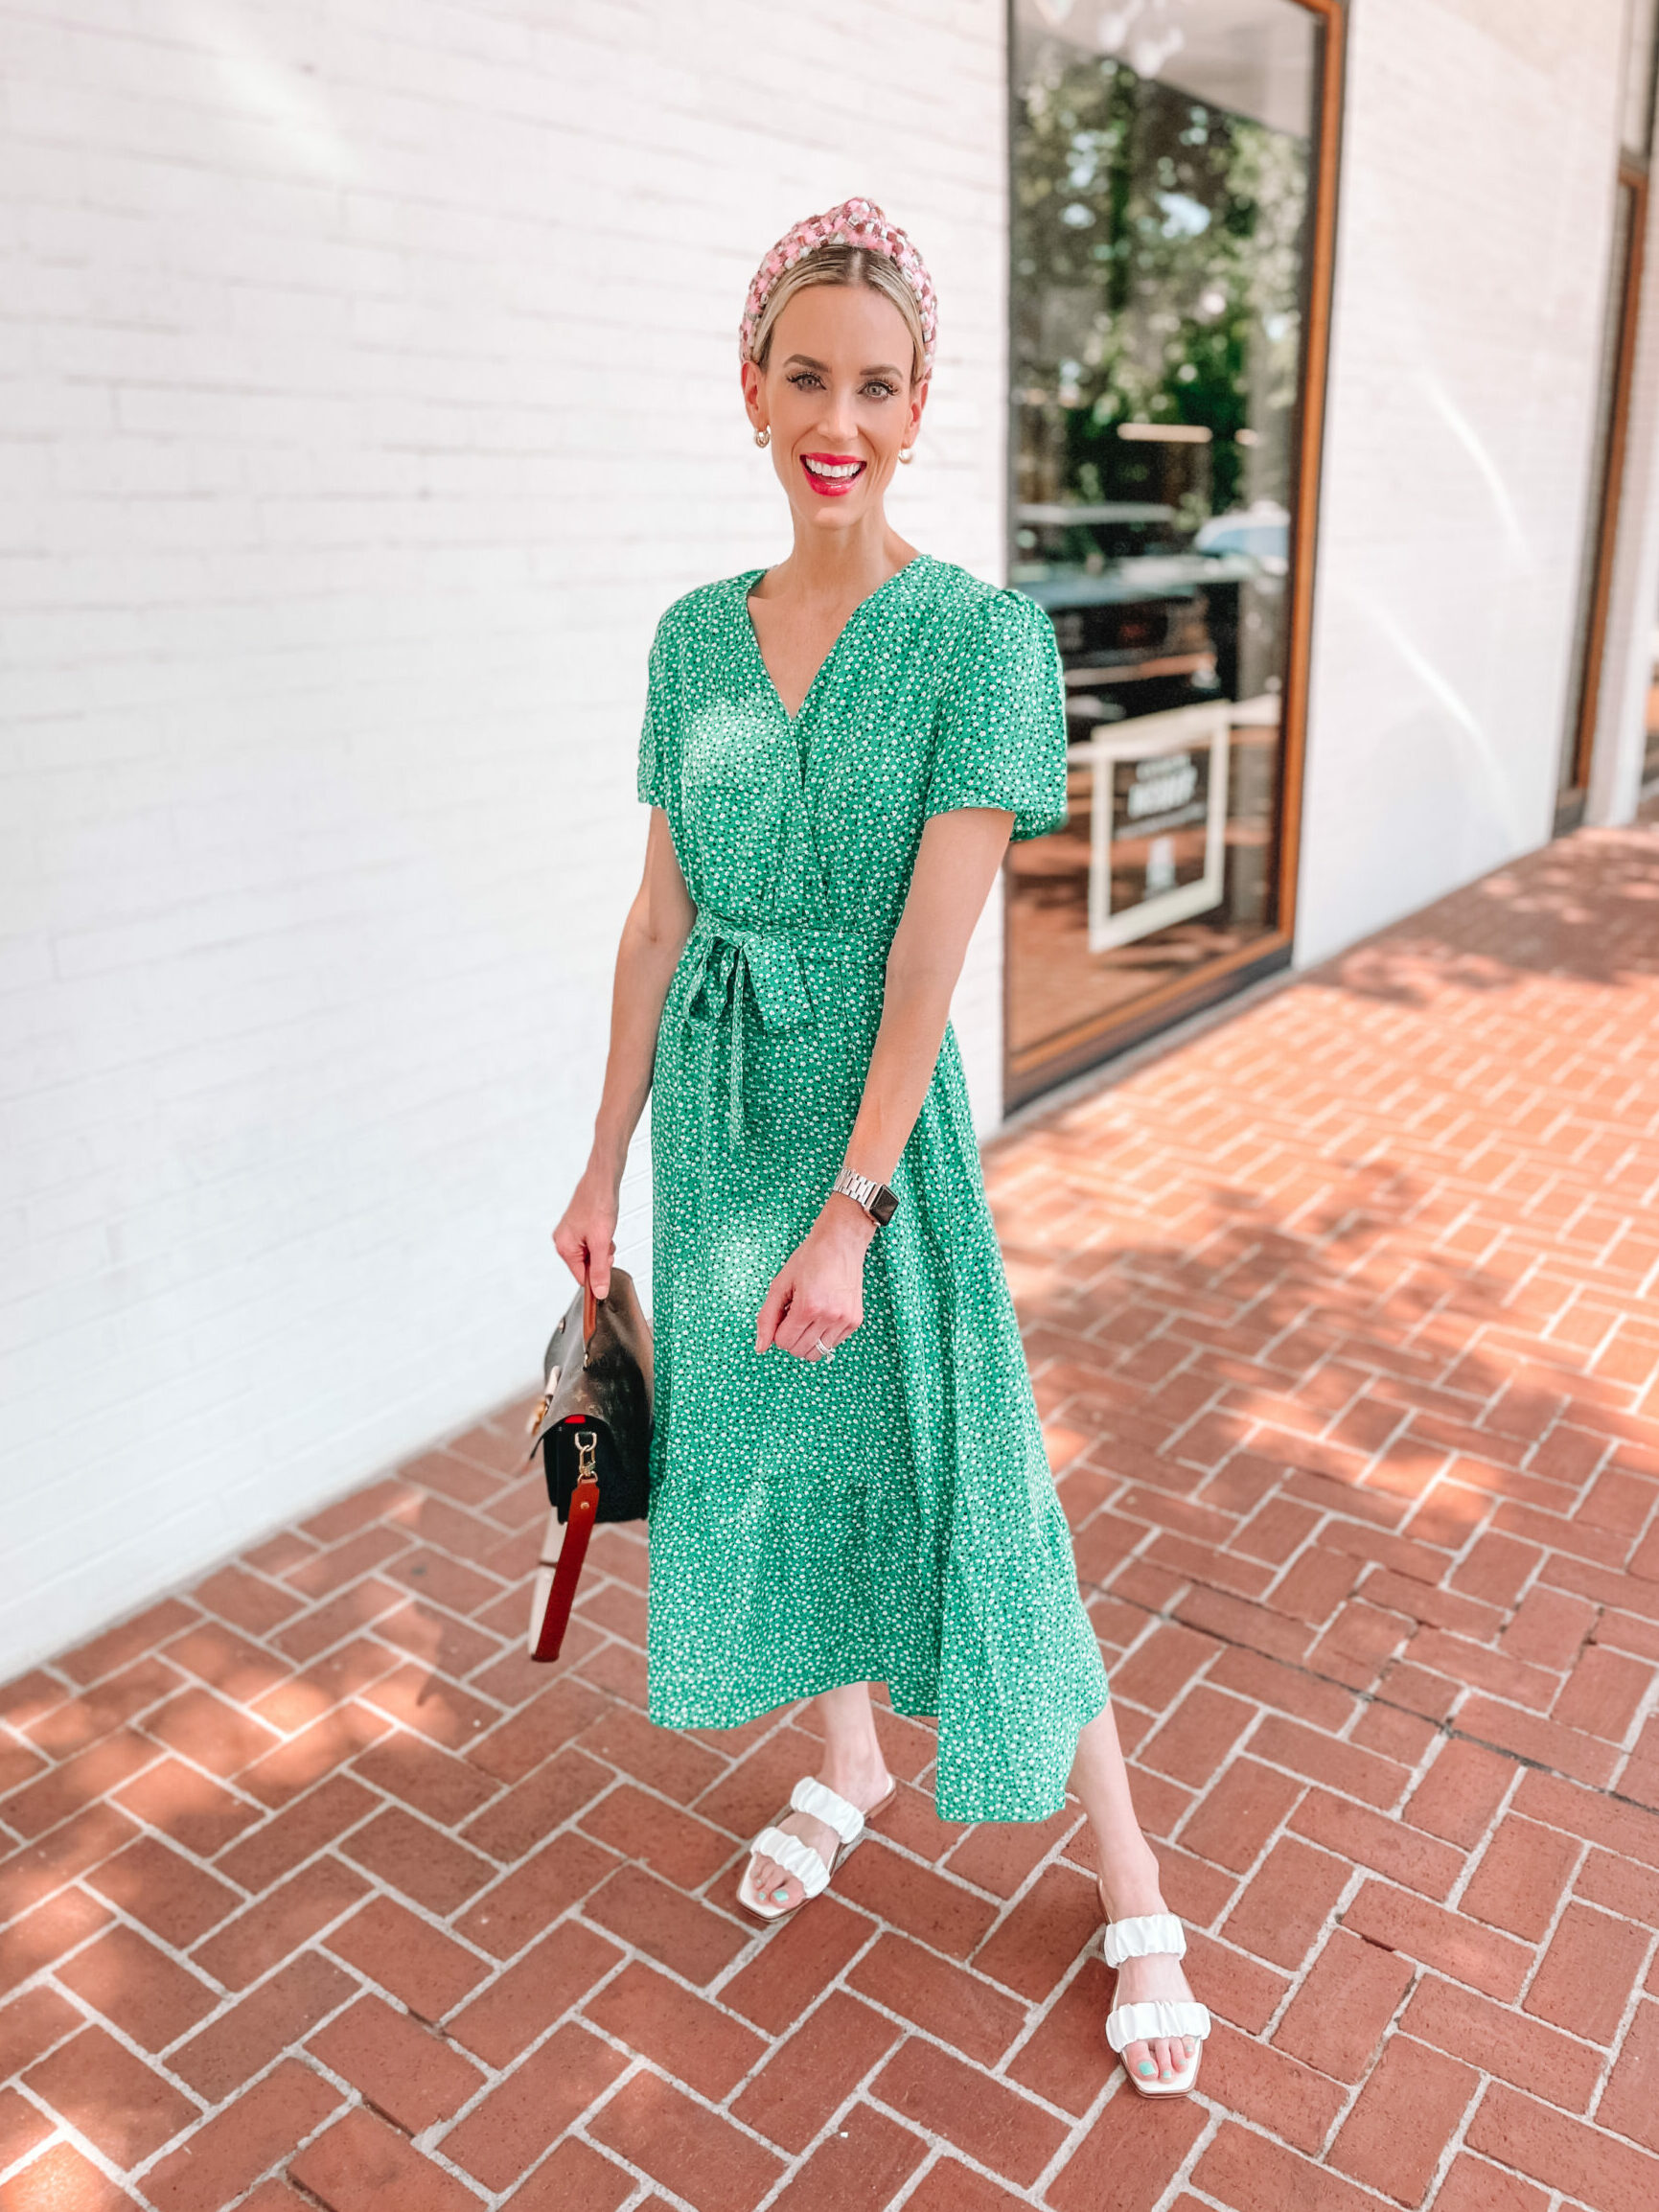 If you're looking for some work outfit inspiration, then you have come to the right place! I'm sharing two Amazon work dresses and two ways to style each! I love this green wrap midi dress. 